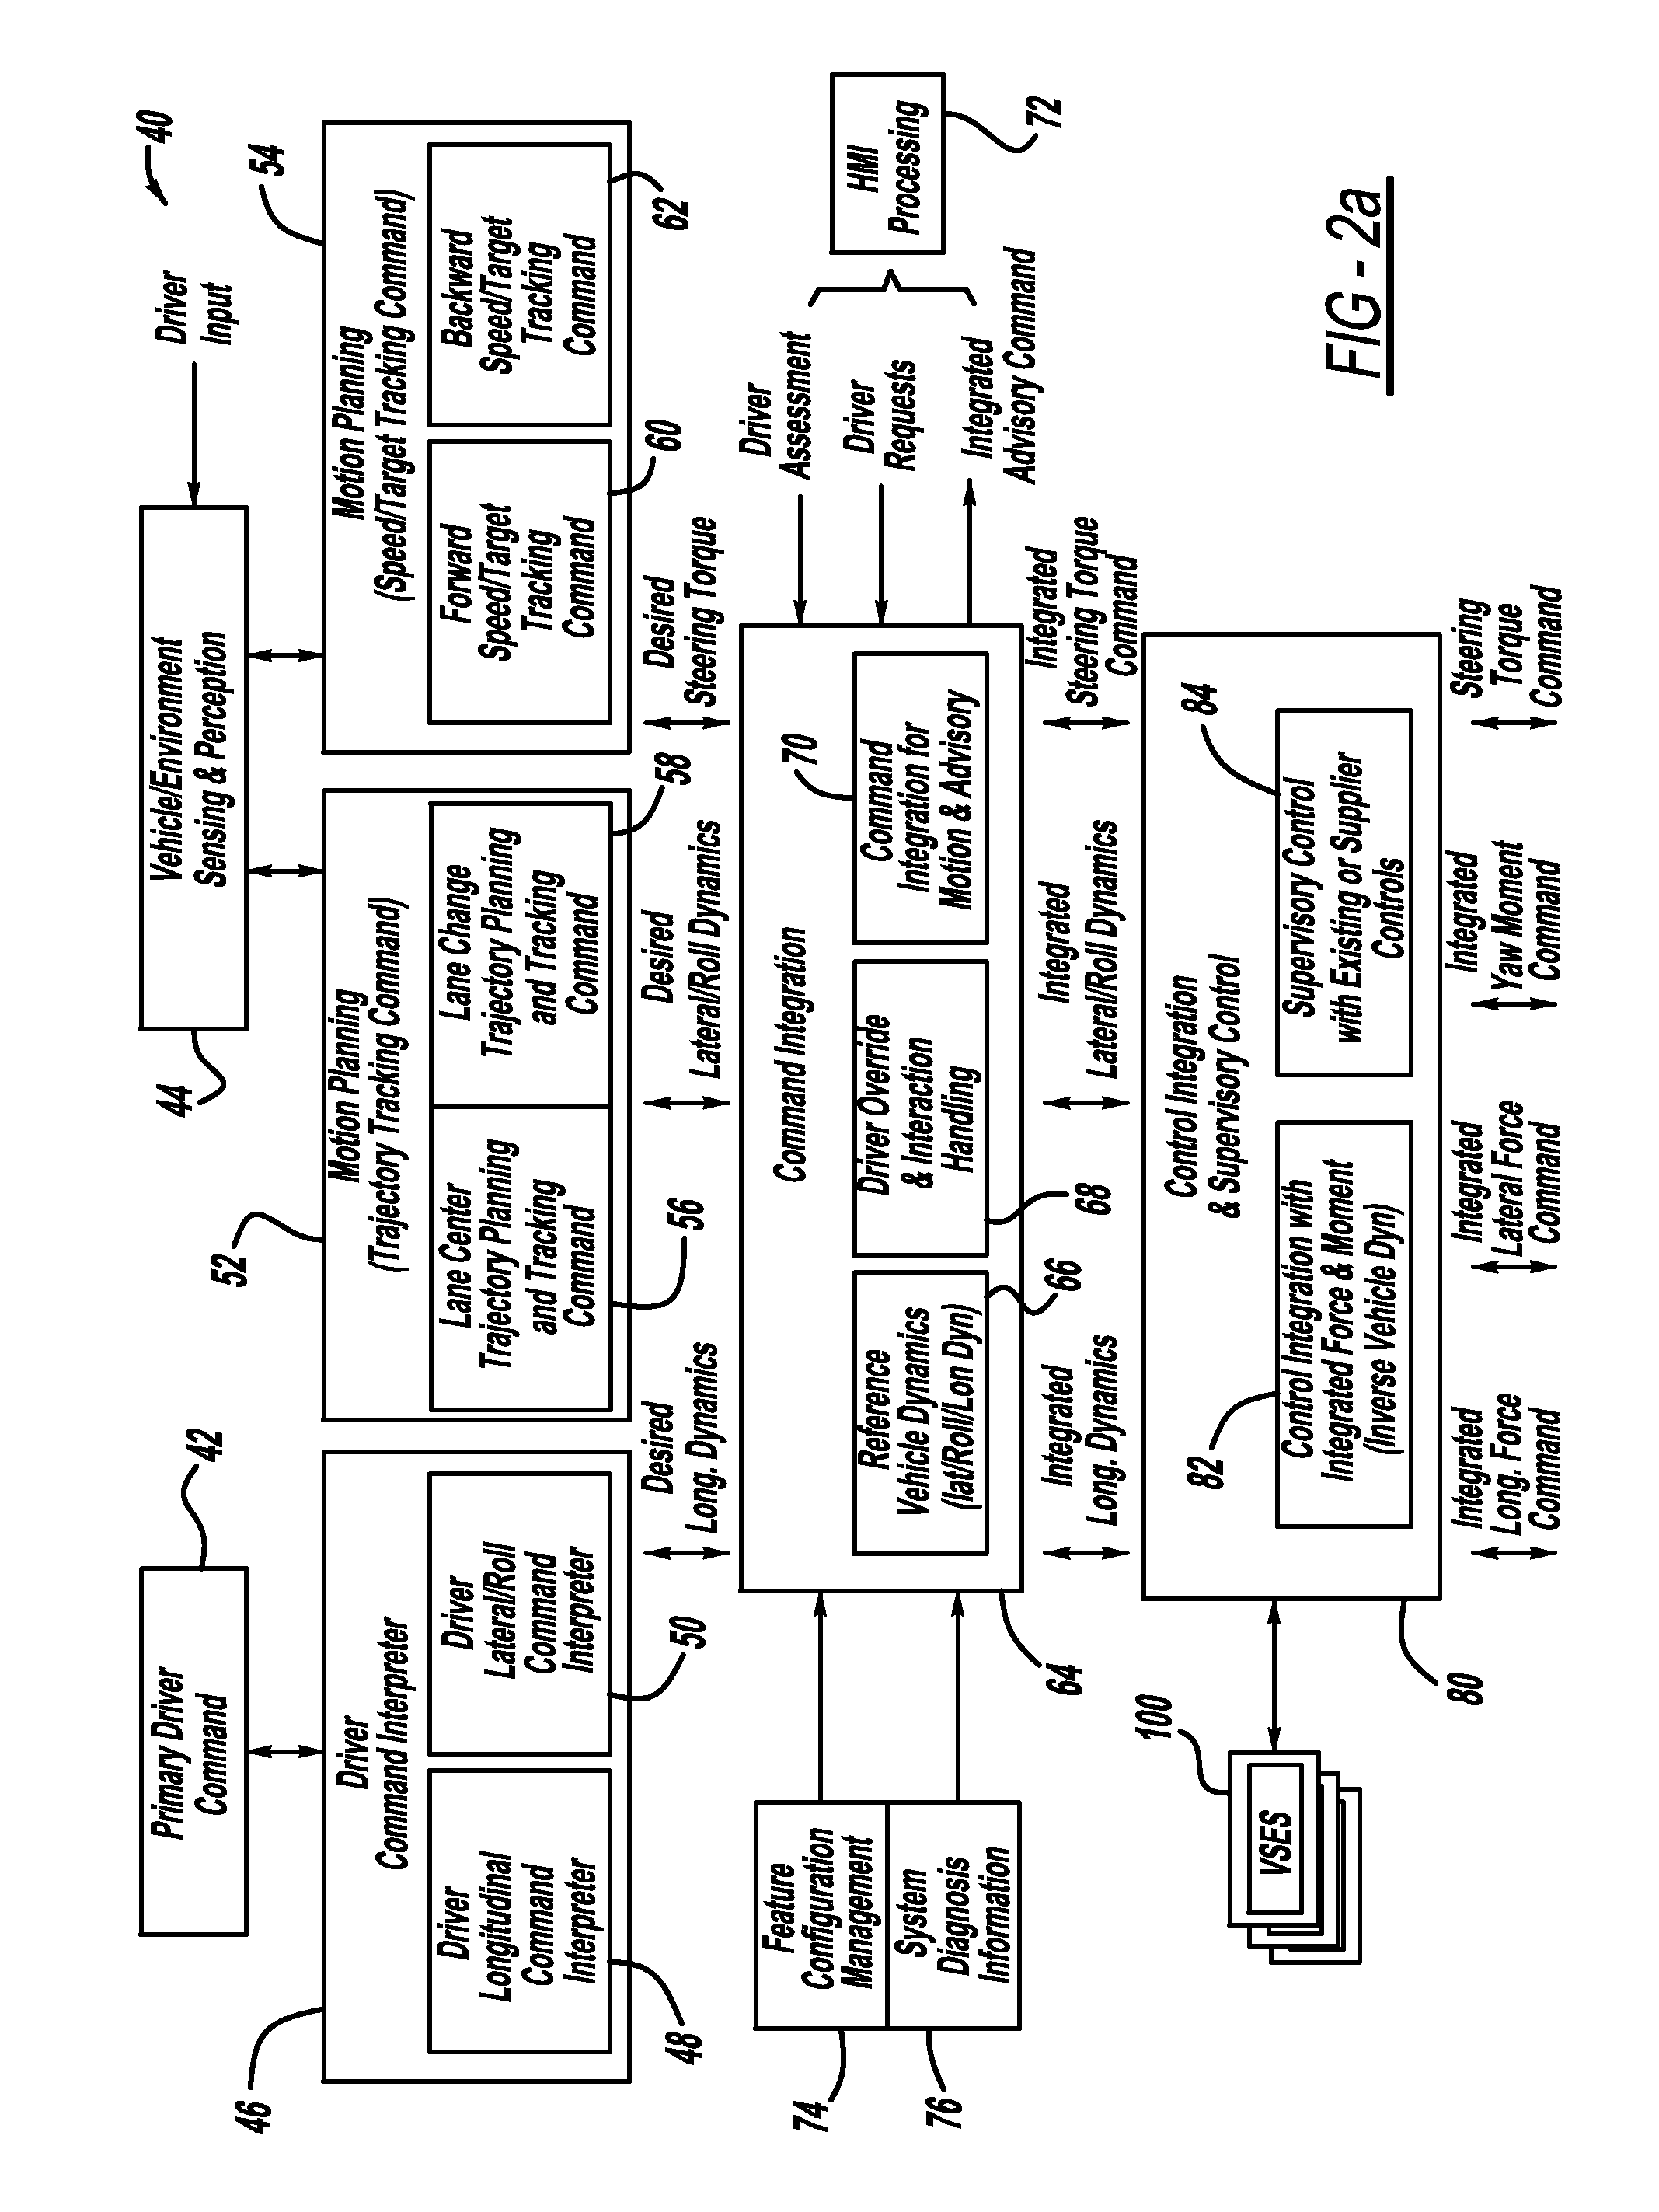 Function decomposition and control architecture for complex vehicle control system